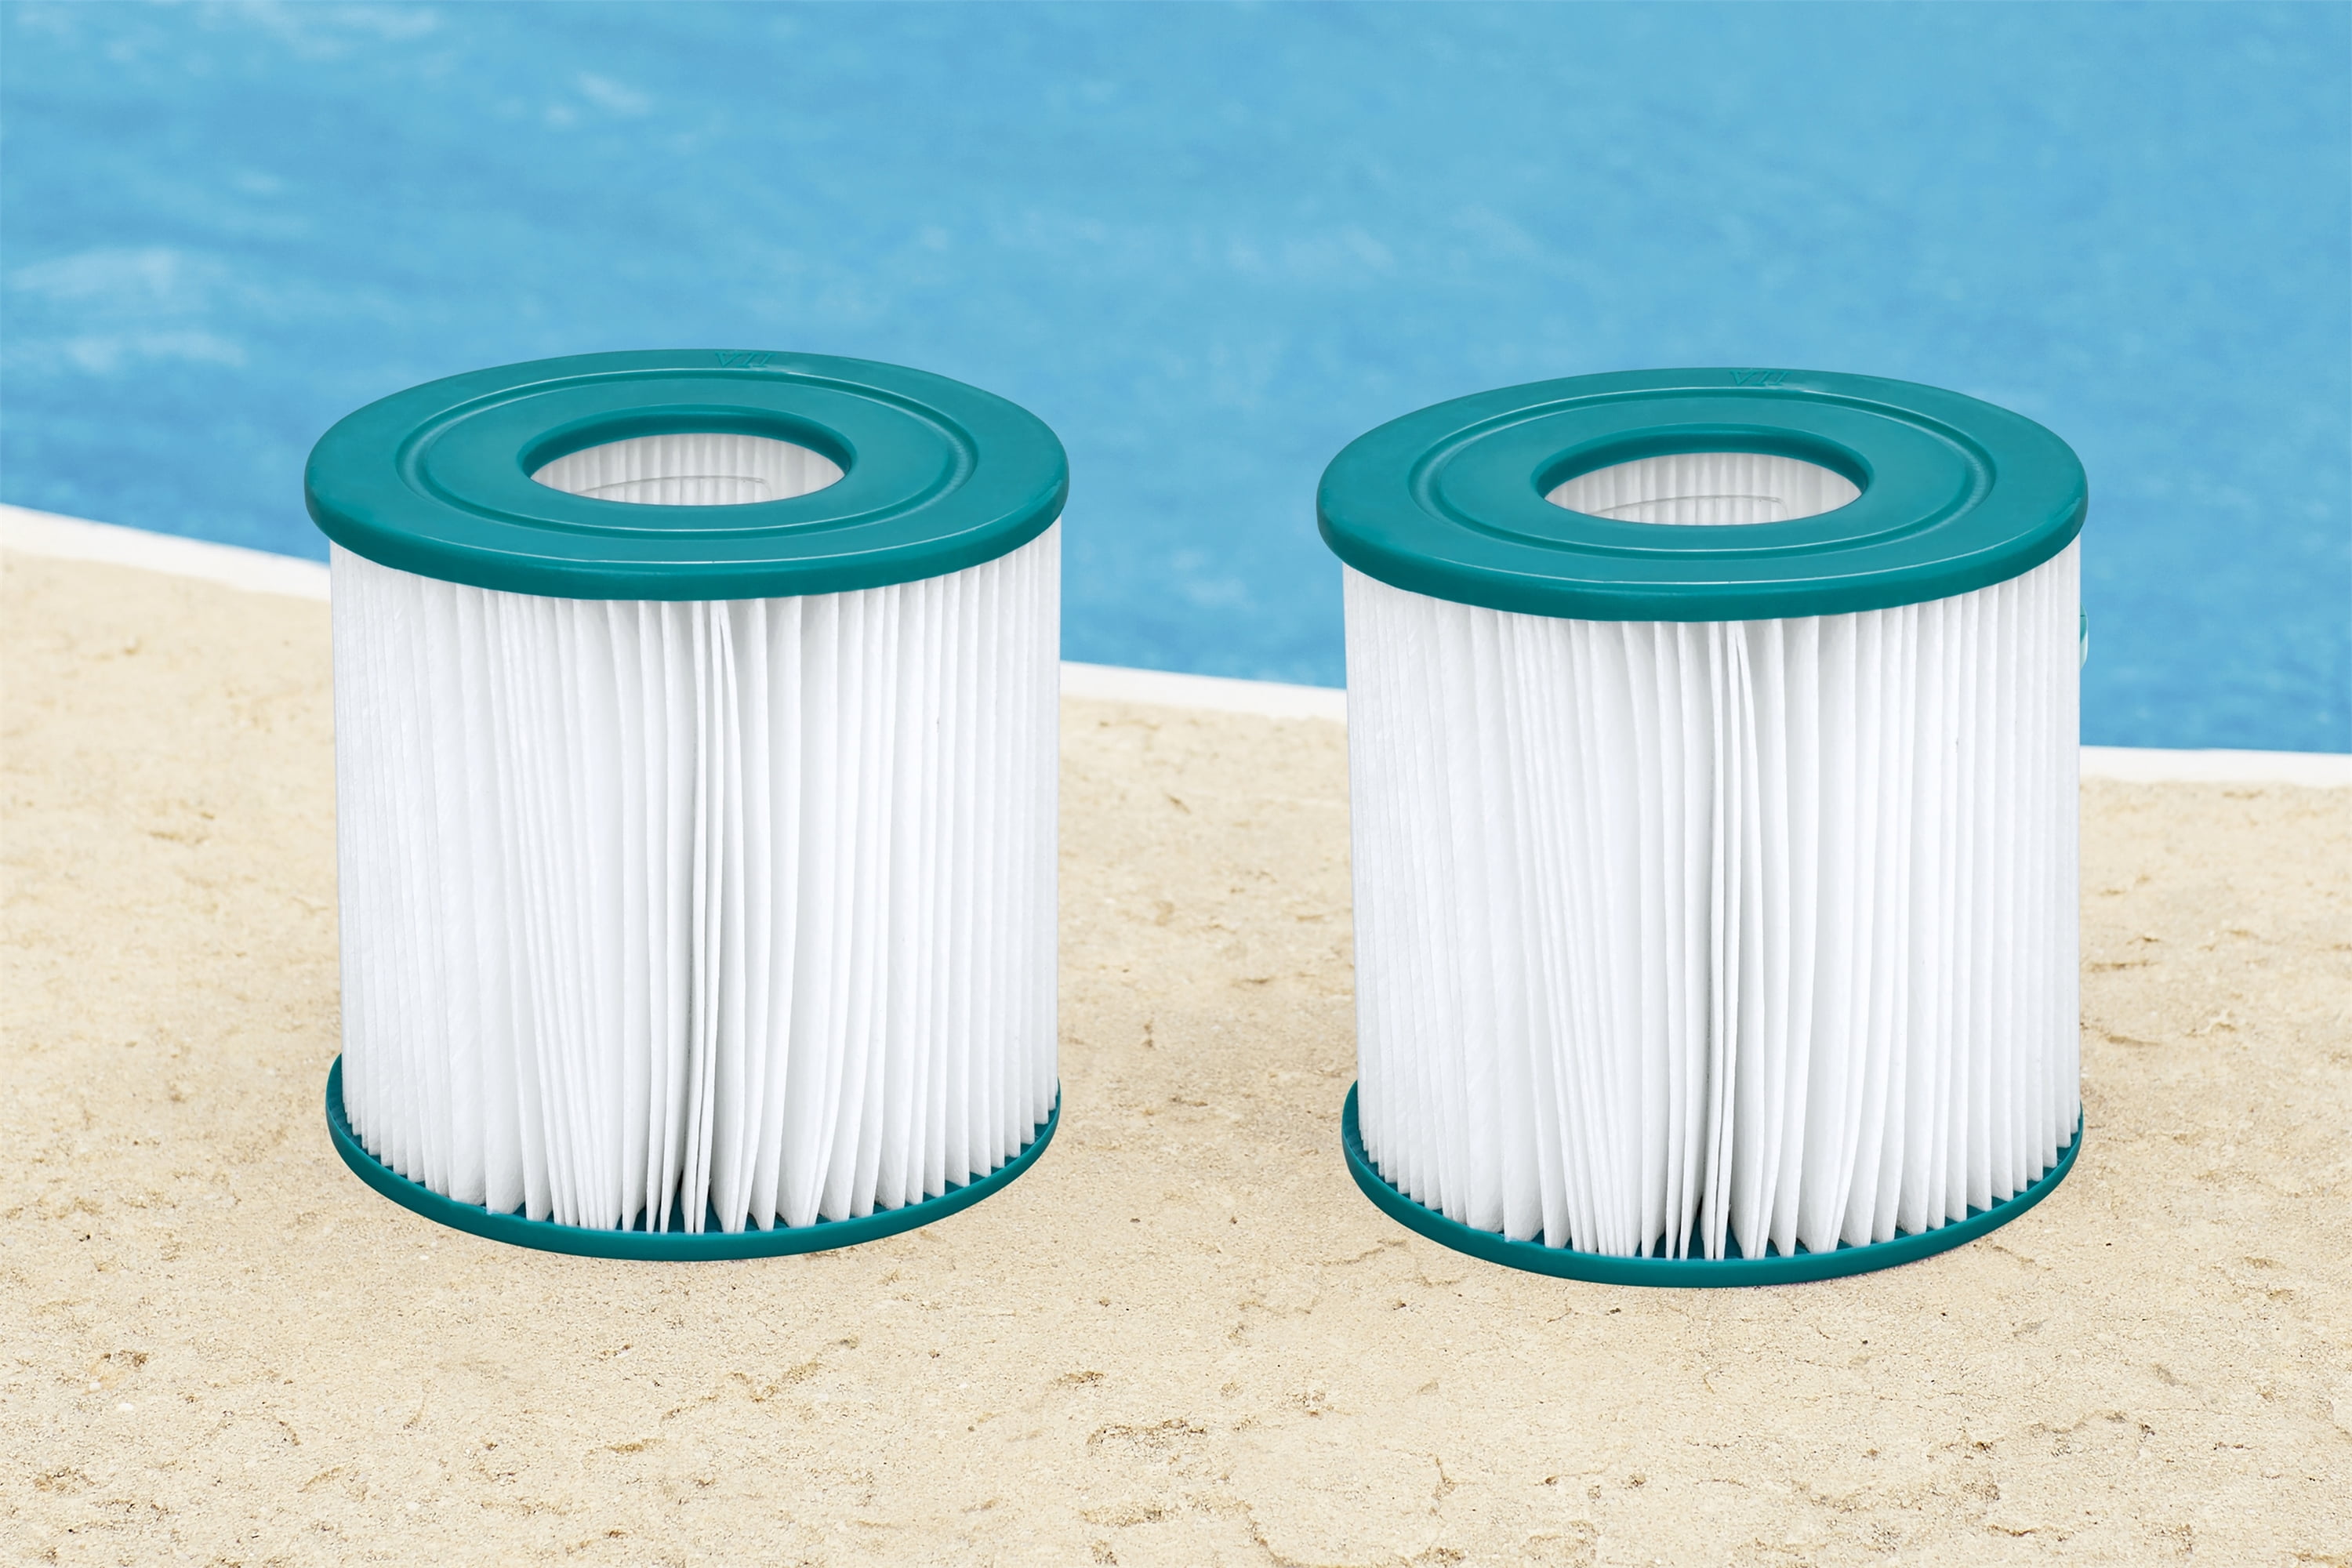 Mainstays Type VII, D Pool Filter Cartridge for Above-Ground Pool, 2 Pack